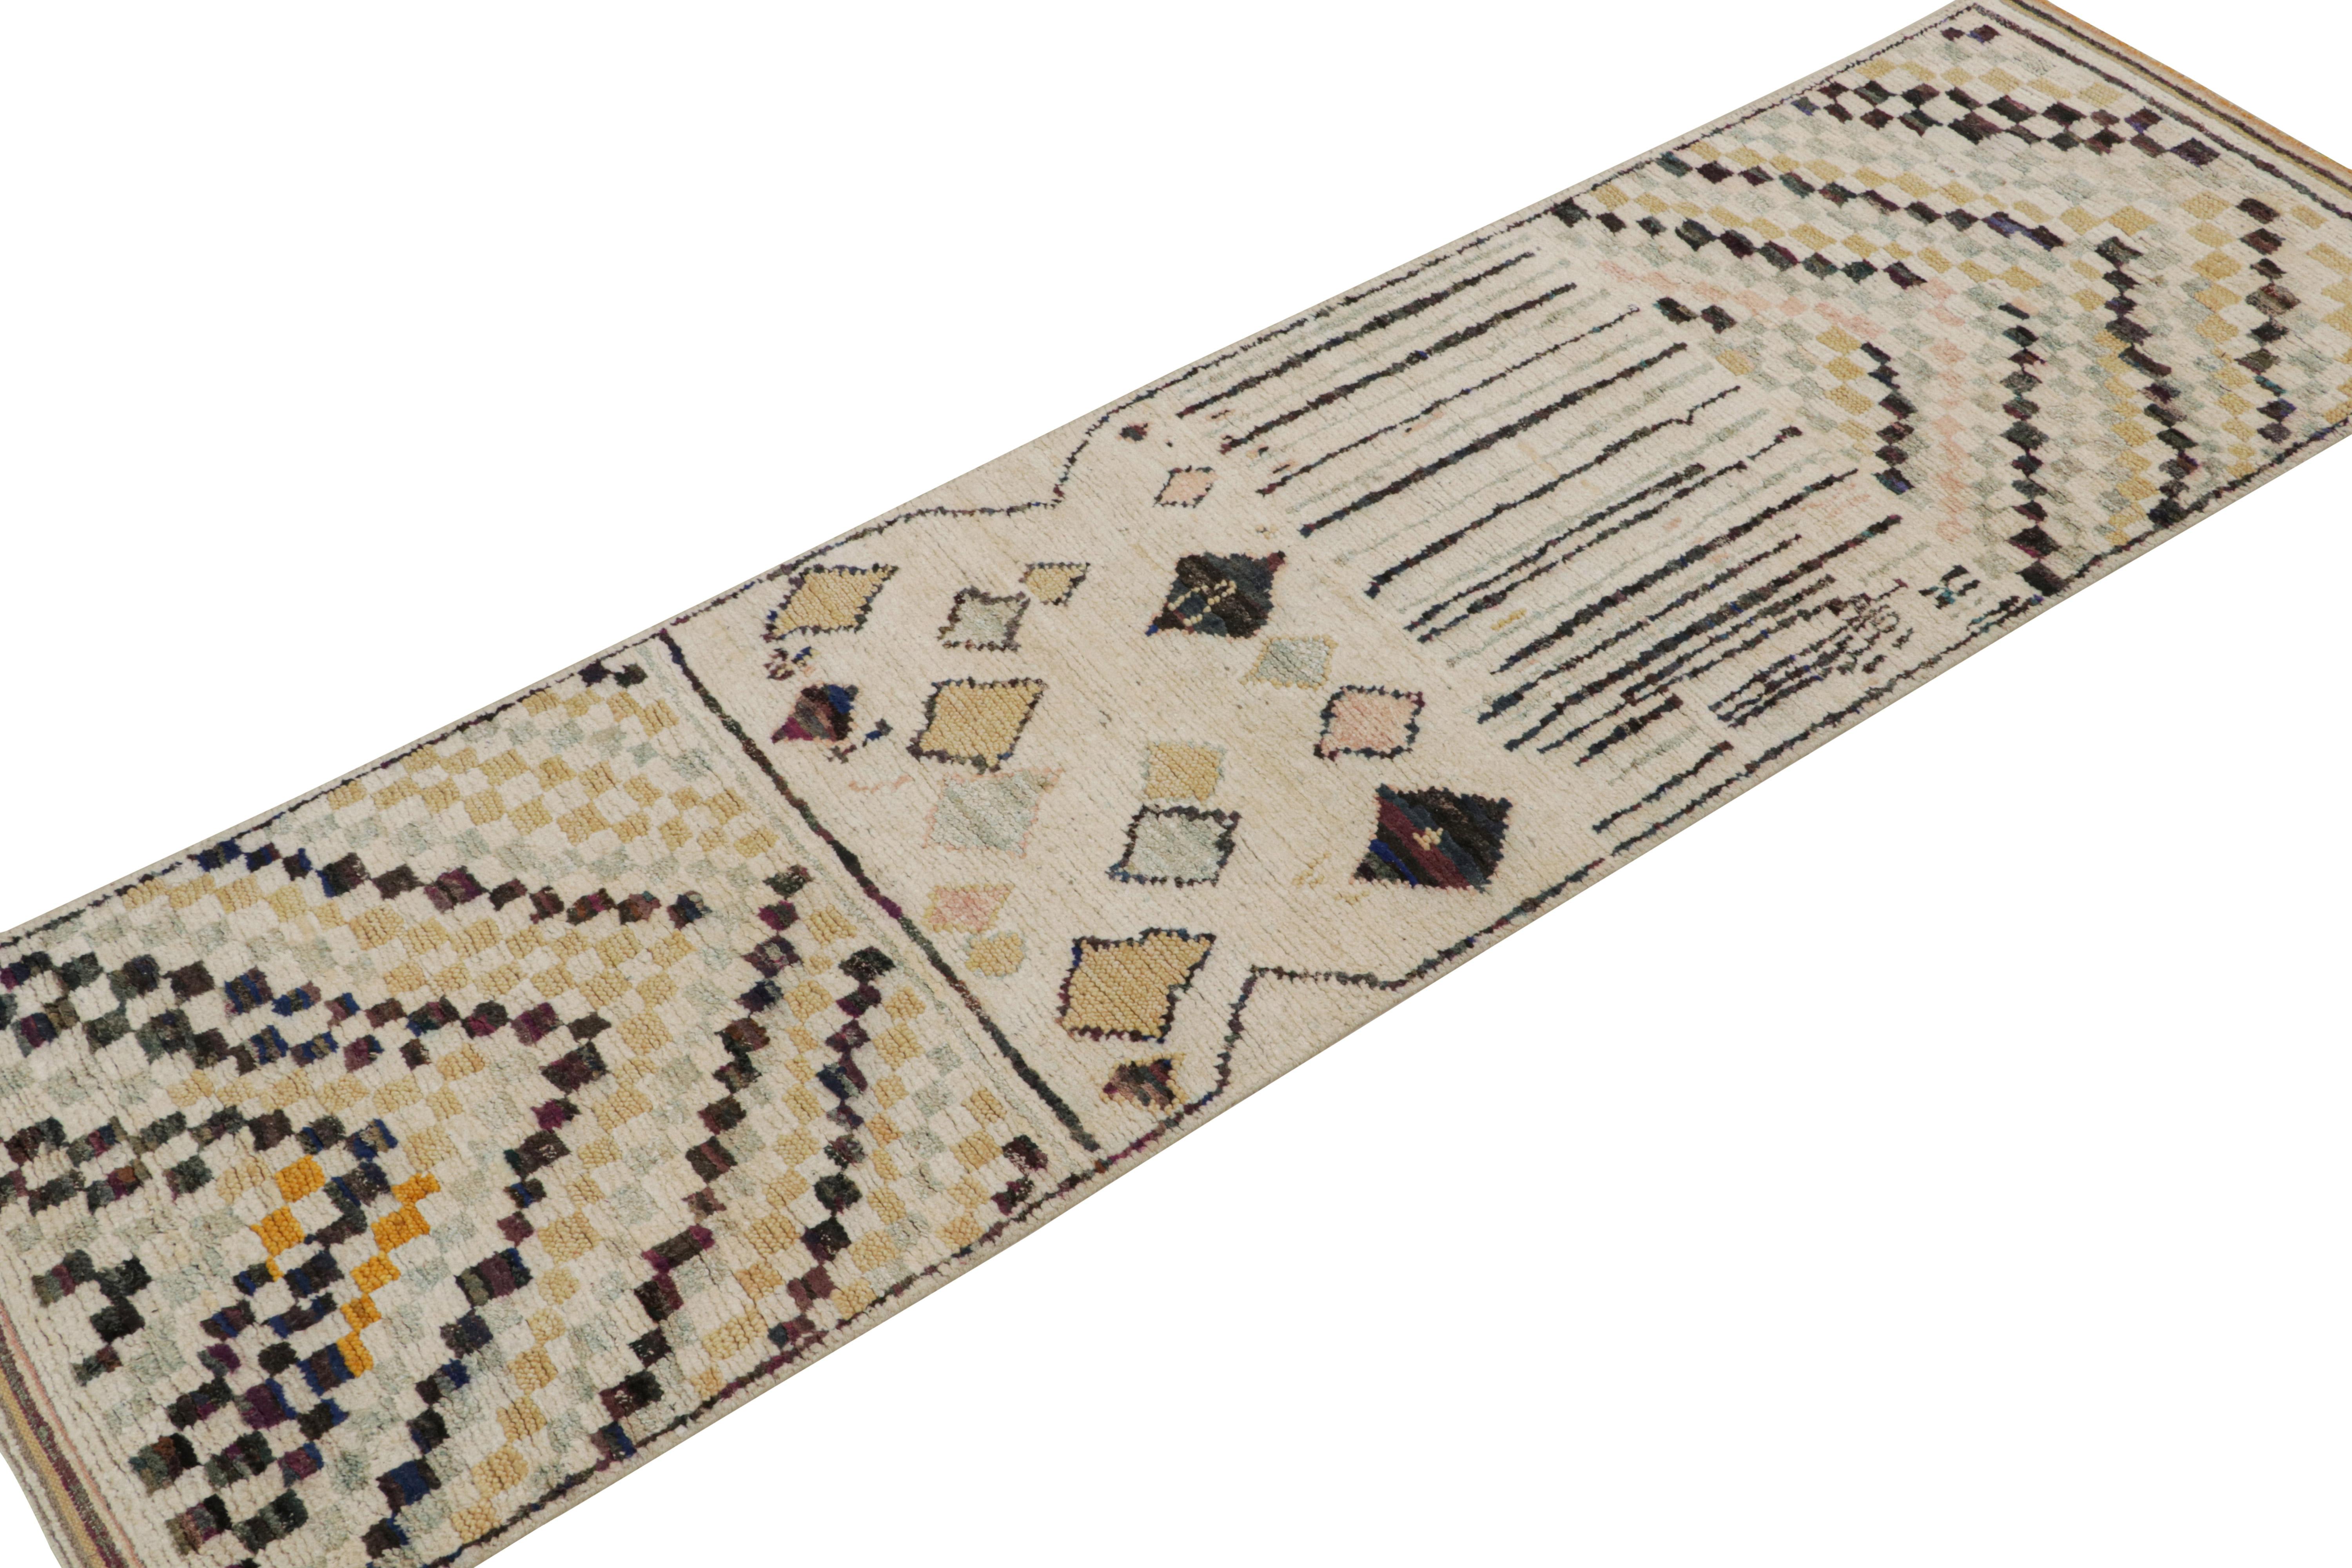 Hand-knotted in wool, cotton and silk, this 3x10 runner rug is from the Moroccan rug collection by Rug & Kilim. 

On the Design:

This designs represent a modern take on the Berber primitivist style, with colorful geometric patterns on a beige